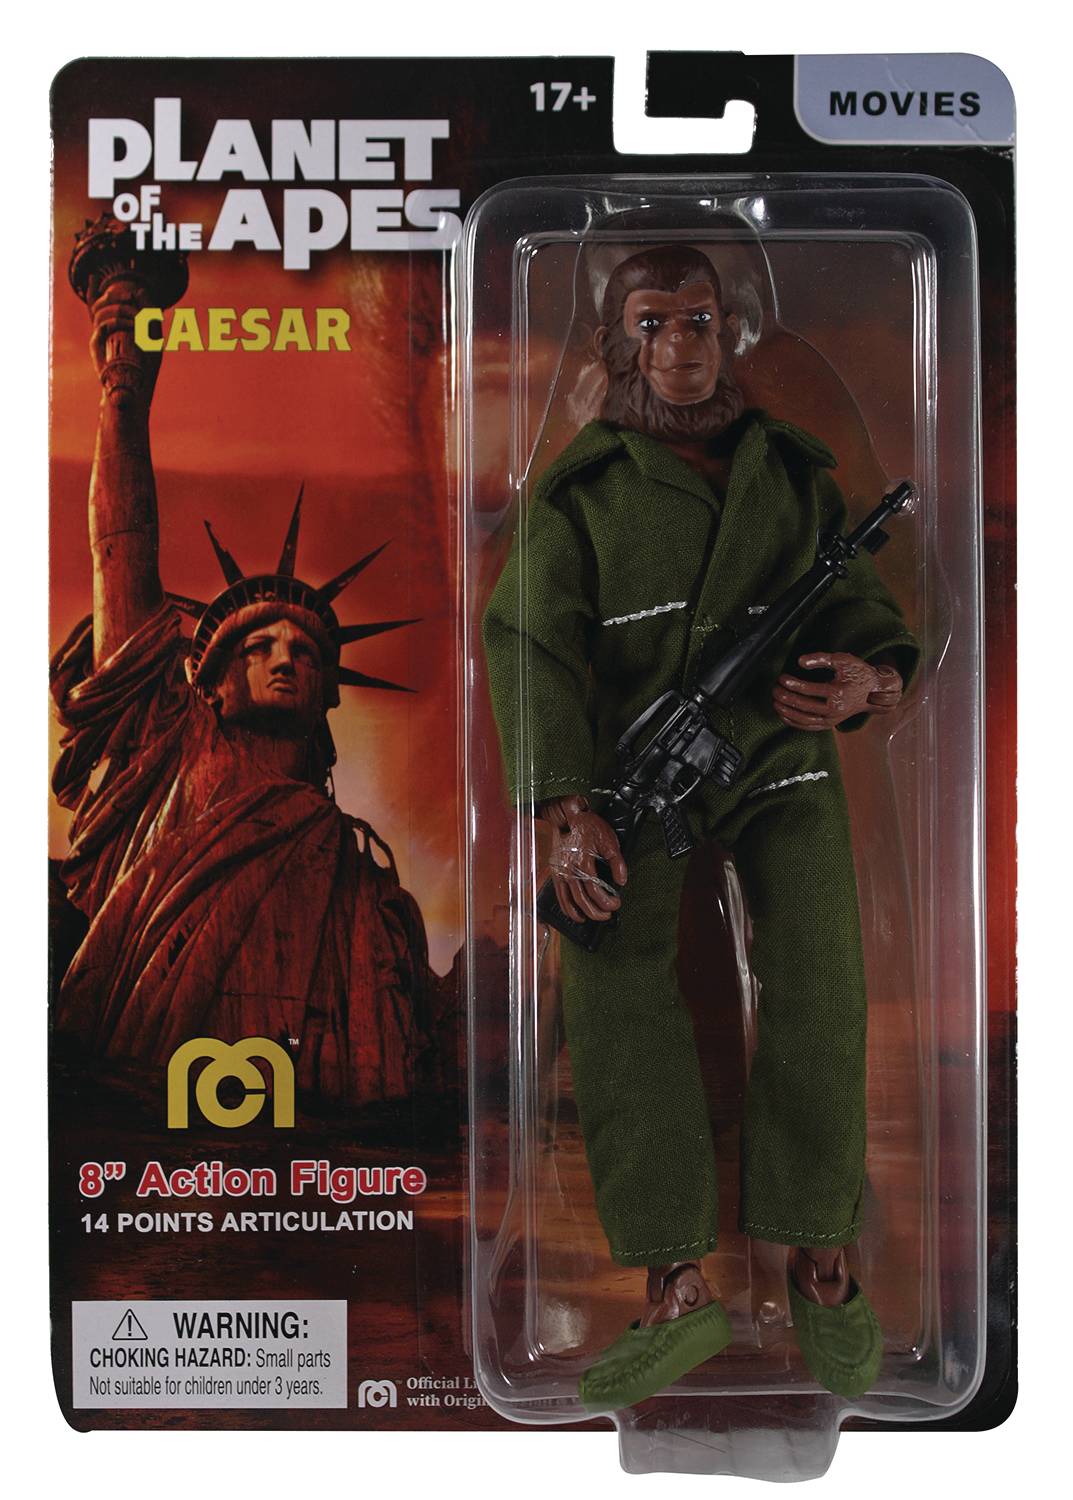 MEGO Planet Of The Apes Caesar 8 Inch Action Figure